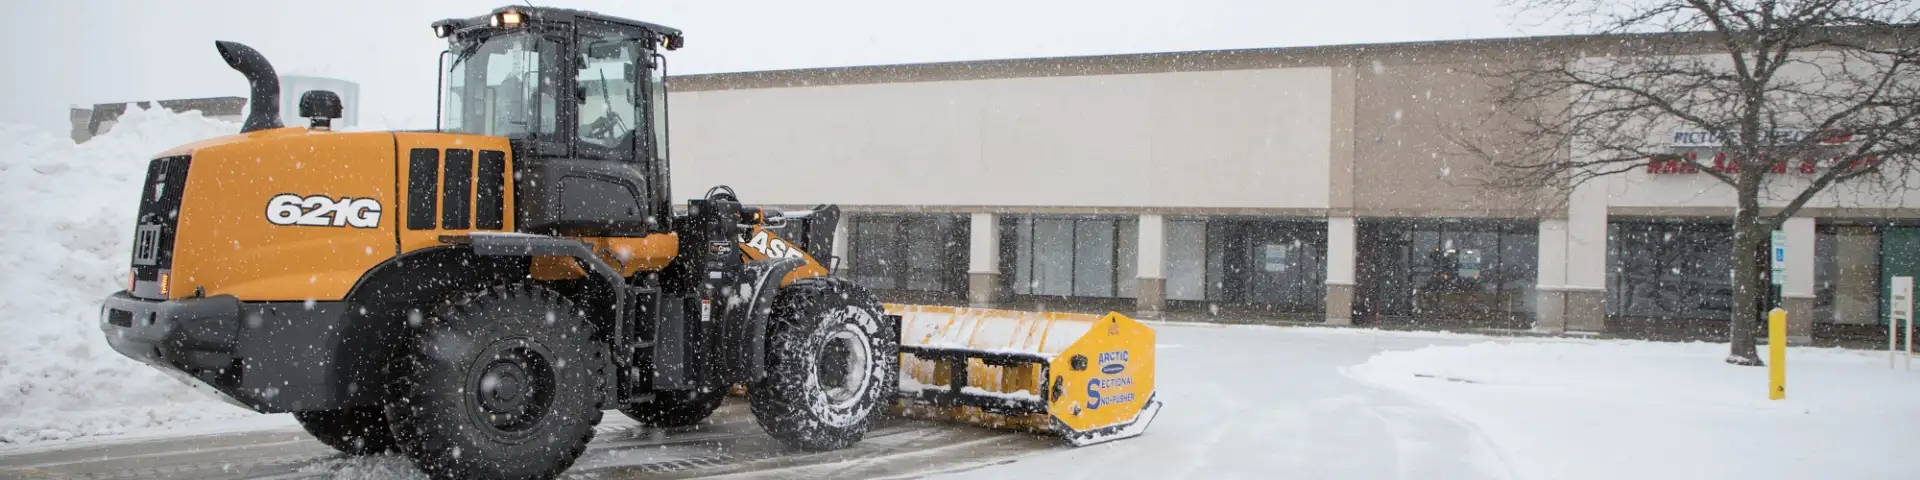 621G Wheel Loader with Sectional Snow Pusher attachment